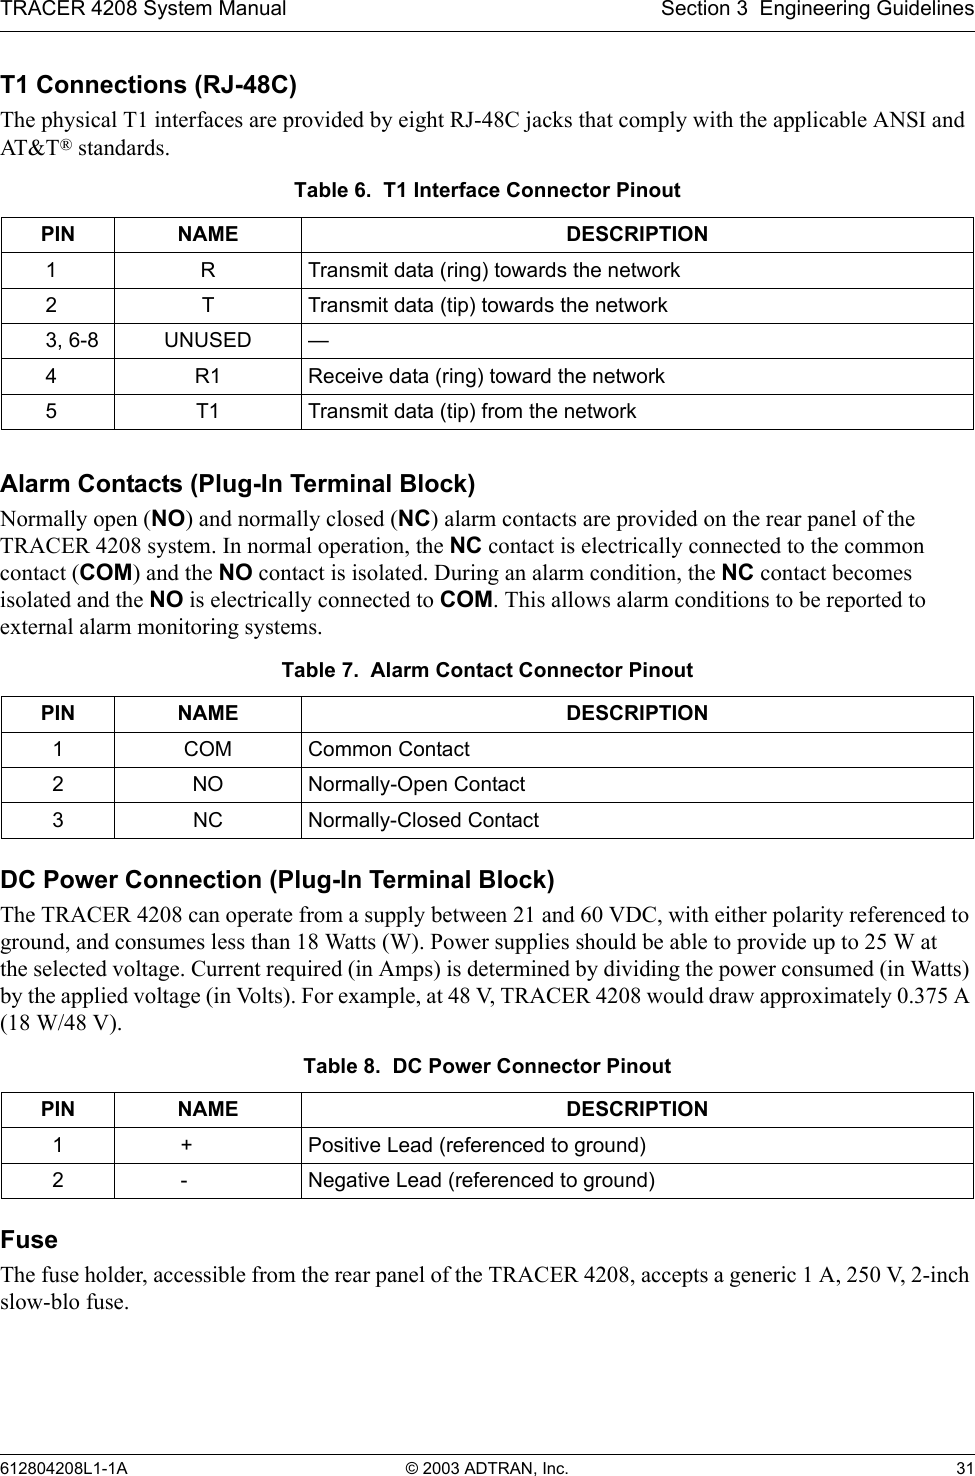 TRACER 4208 System Manual Section 3  Engineering Guidelines612804208L1-1A © 2003 ADTRAN, Inc. 31T1 Connections (RJ-48C)The physical T1 interfaces are provided by eight RJ-48C jacks that comply with the applicable ANSI and AT&amp;T® standards.Alarm Contacts (Plug-In Terminal Block)Normally open (NO) and normally closed (NC) alarm contacts are provided on the rear panel of the TRACER 4208 system. In normal operation, the NC contact is electrically connected to the common contact (COM) and the NO contact is isolated. During an alarm condition, the NC contact becomes isolated and the NO is electrically connected to COM. This allows alarm conditions to be reported to external alarm monitoring systems.DC Power Connection (Plug-In Terminal Block)The TRACER 4208 can operate from a supply between 21 and 60 VDC, with either polarity referenced to ground, and consumes less than 18 Watts (W). Power supplies should be able to provide up to 25 W atthe selected voltage. Current required (in Amps) is determined by dividing the power consumed (in Watts) by the applied voltage (in Volts). For example, at 48 V, TRACER 4208 would draw approximately 0.375 A (18 W/48 V).FuseThe fuse holder, accessible from the rear panel of the TRACER 4208, accepts a generic 1 A, 250 V, 2-inch slow-blo fuse.Table 6.  T1 Interface Connector PinoutPIN NAME DESCRIPTION1RTransmit data (ring) towards the network2 T Transmit data (tip) towards the network3, 6-8 UNUSED —4R1 Receive data (ring) toward the network5T1 Transmit data (tip) from the networkTable 7.  Alarm Contact Connector PinoutPIN NAME DESCRIPTION1 COM Common Contact2NO Normally-Open Contact3NC Normally-Closed ContactTable 8.  DC Power Connector PinoutPIN NAME DESCRIPTION1 + Positive Lead (referenced to ground)2 - Negative Lead (referenced to ground)